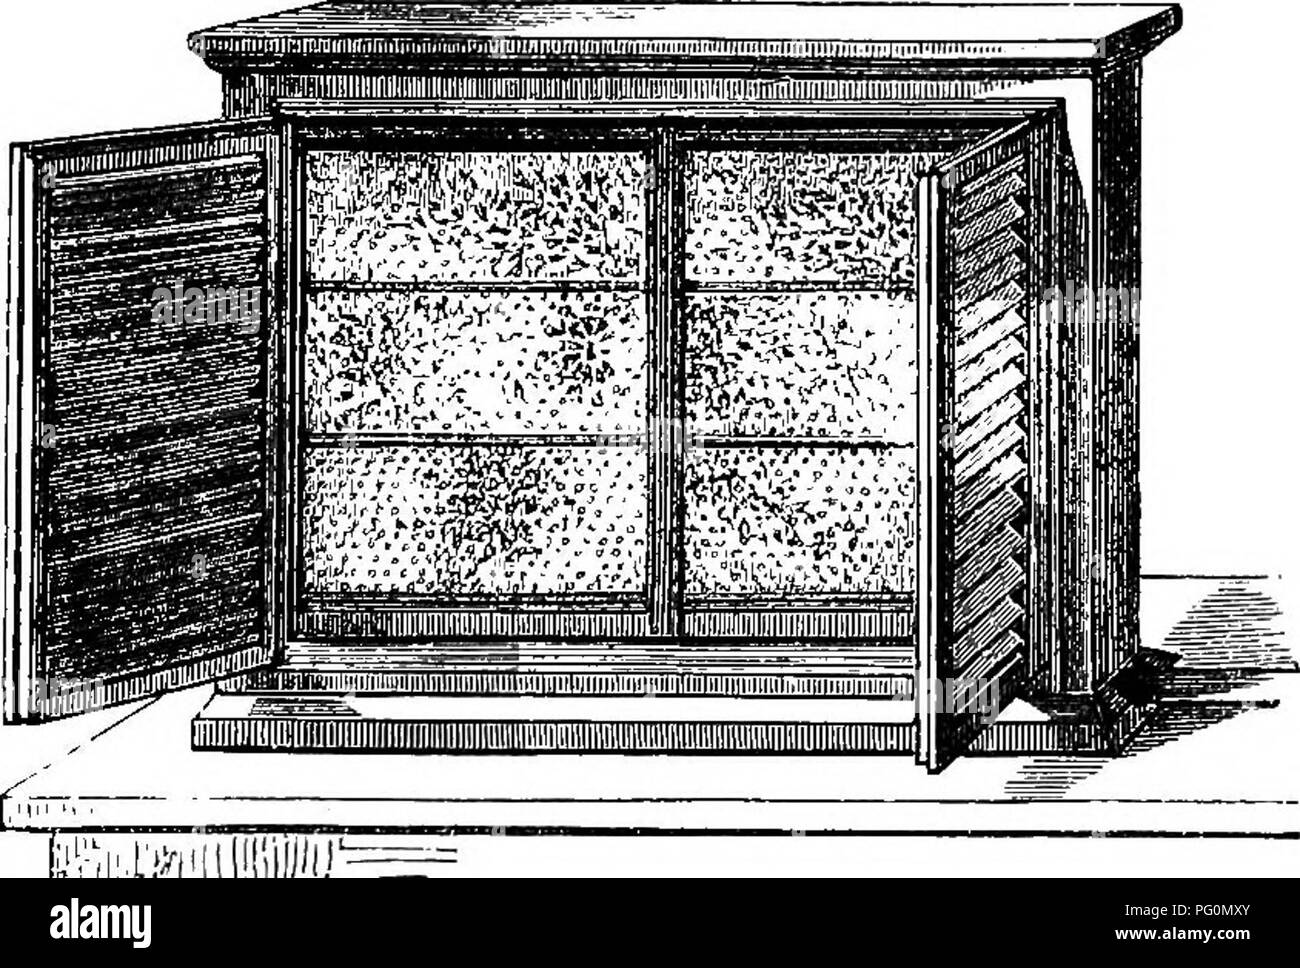 . The honey-bee; its nature, homes and products. Bees. 168 THE HONEY-BEE. by rotating the hive, and the different classes of the population can be studied, and their work surveyed in security and continuously. The unicomb hive may be stocked in various ways. The simplest plan is to take from a bar-frame hive the comb on which the queen is, and put it into the unicomb hive with as many more empty frames as will fill all the space intended for their reception.. ;!^^'fk!!ij,i!i;;^viii;?,, Fig. 59.—Unicomb Observatory Hive. In this way new clean comb will be made, giving a much better appearance t Stock Photo